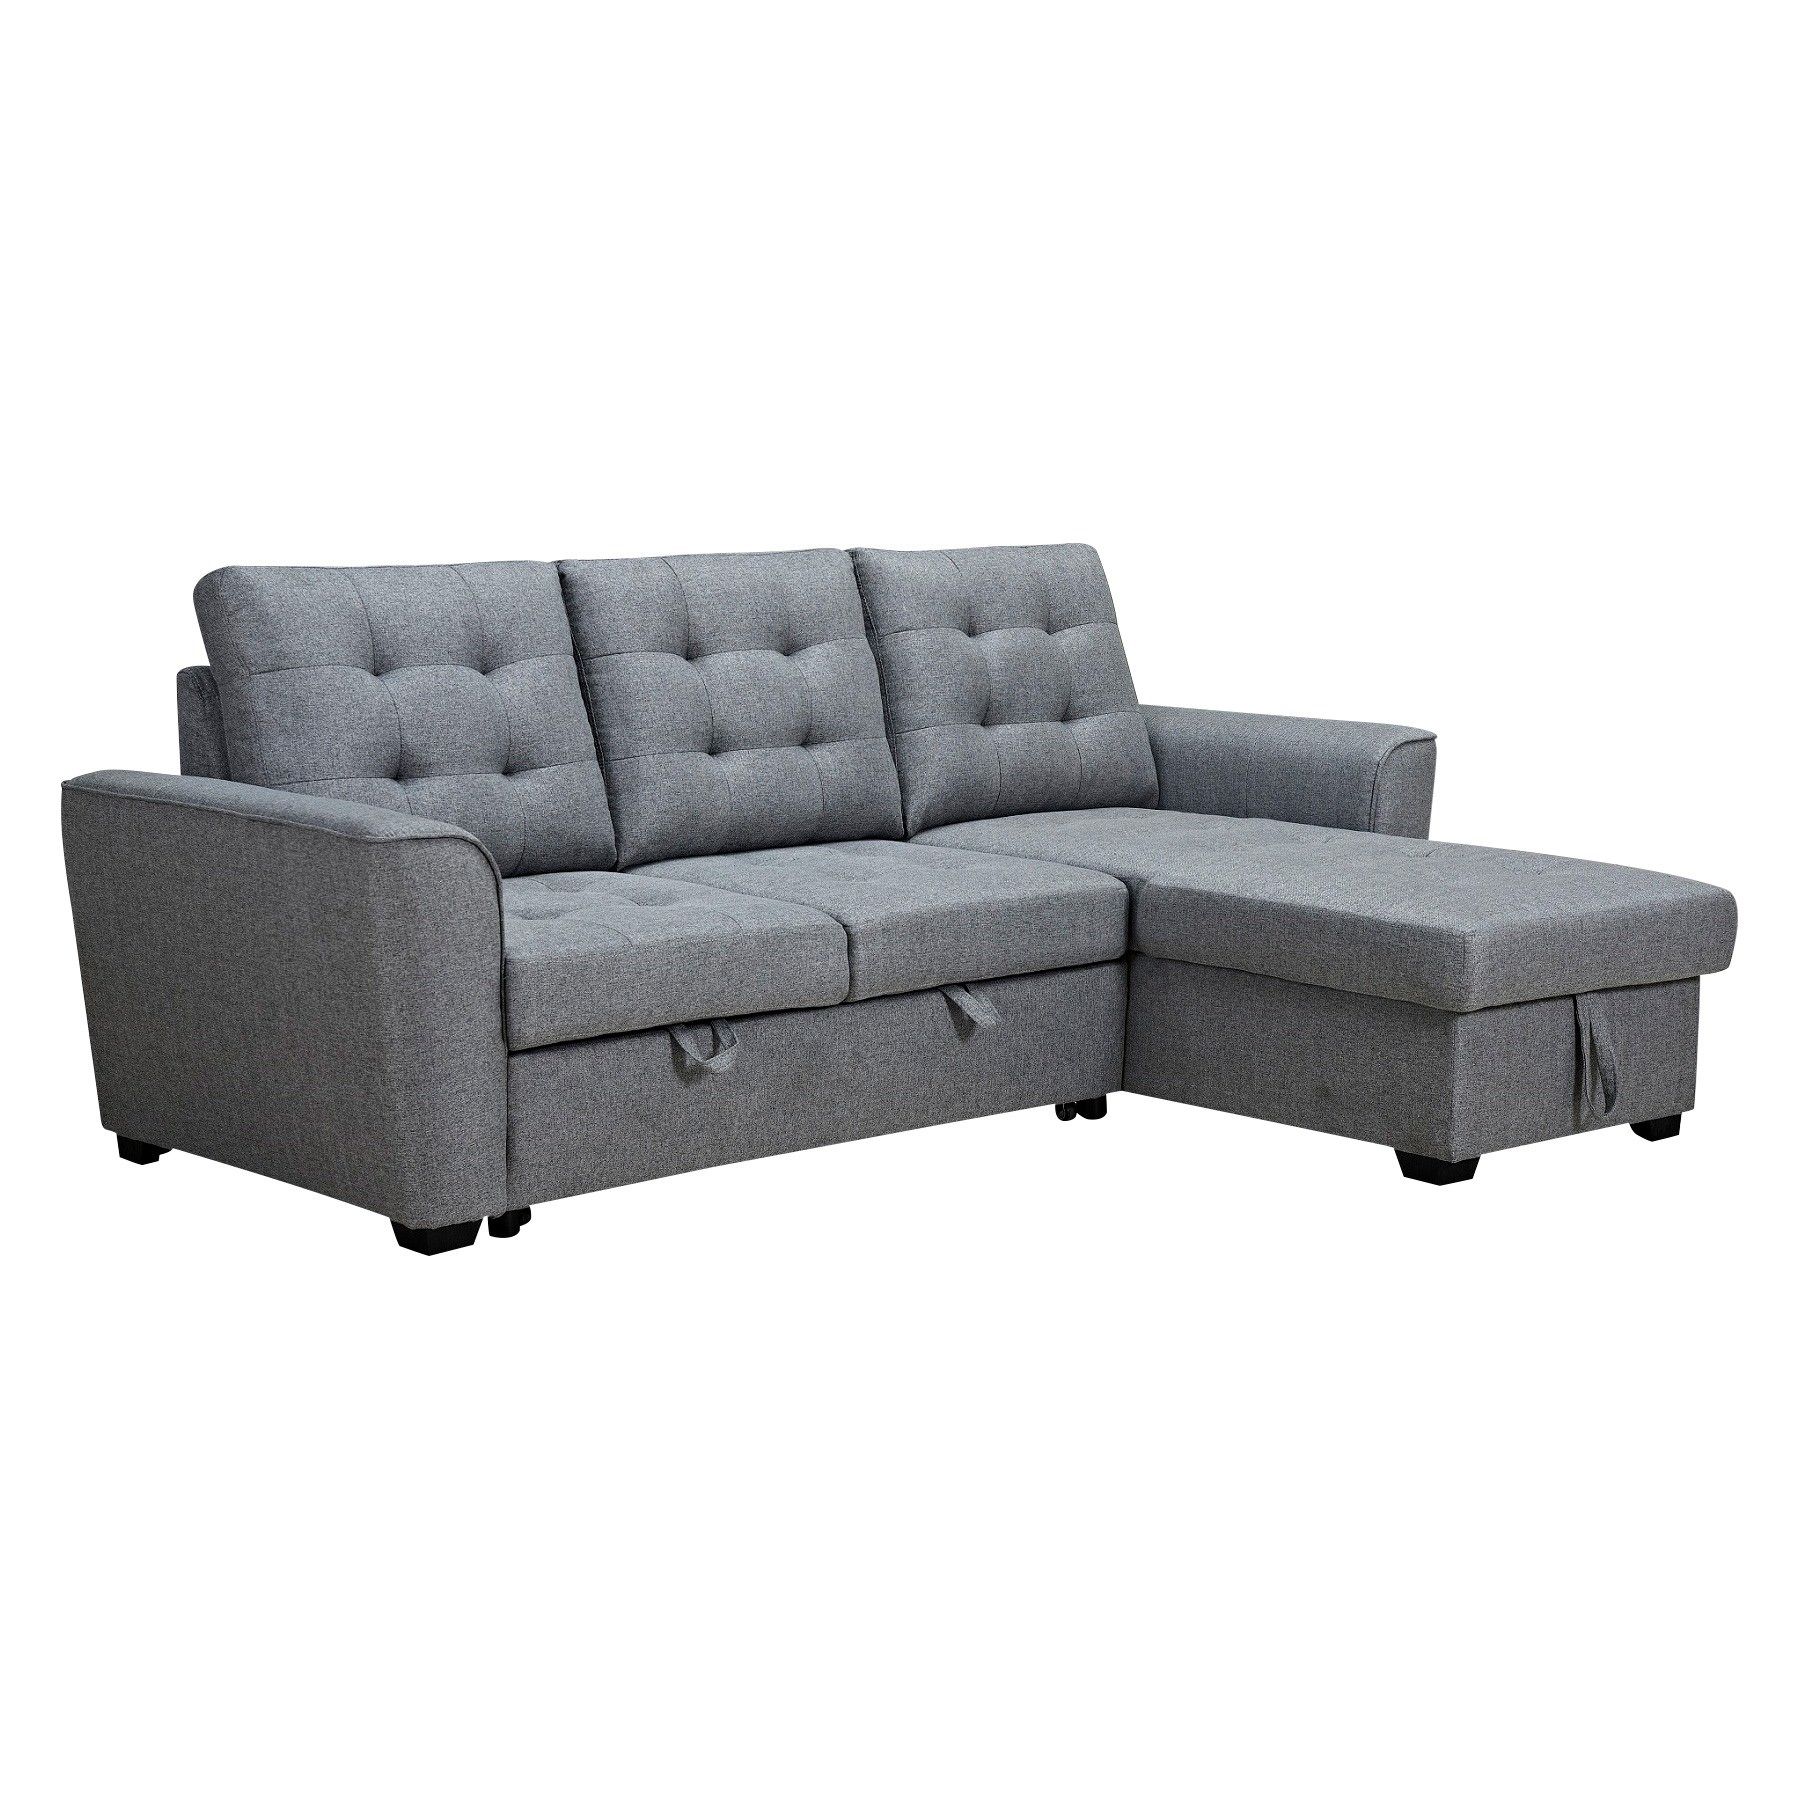 Mardi Fabric Sofa / Pull Out Sofa Bed, 2 Seater With Reversible Storage Pertaining To 2 In 1 Gray Pull Out Sofa Beds (Gallery 6 of 20)